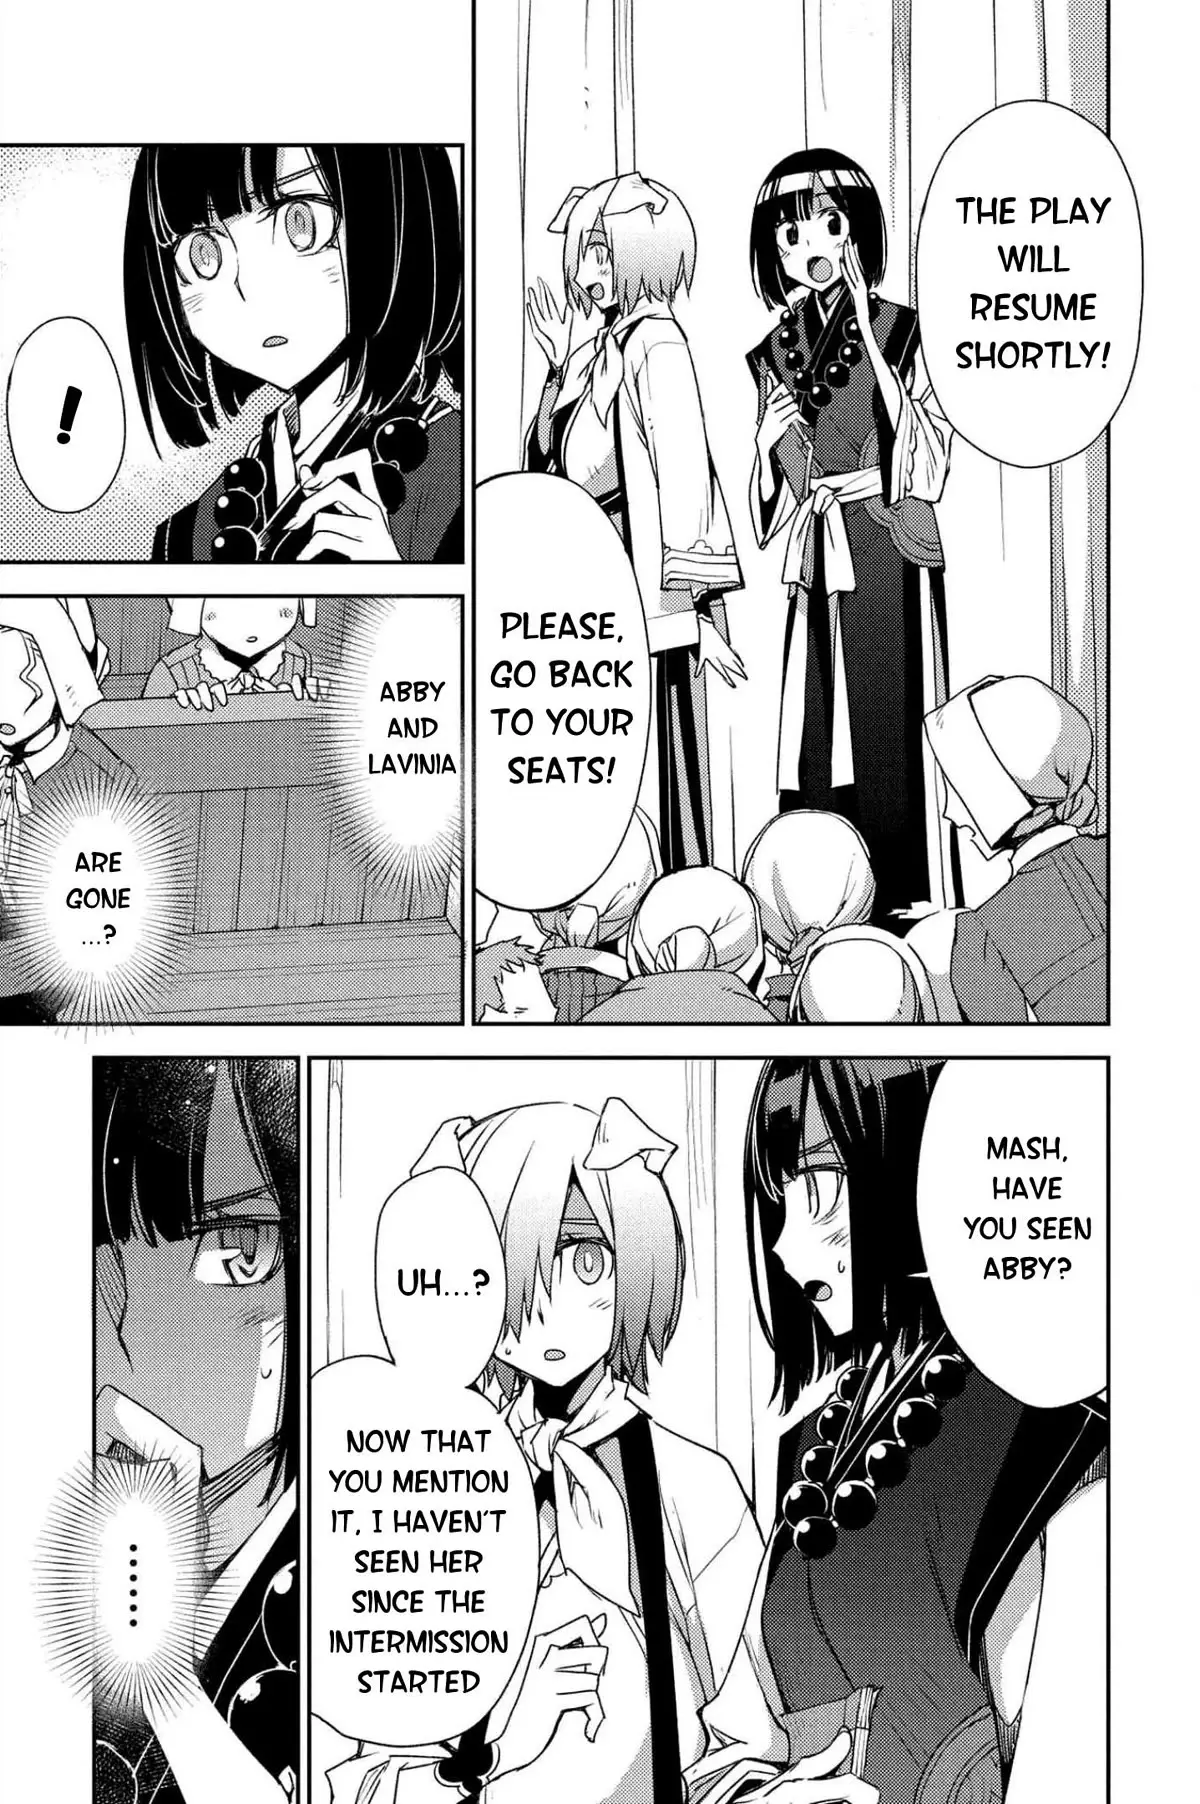 Fate/grand Order: Epic Of Remnant - Subspecies Singularity Iv: Taboo Advent Salem: Salem Of Heresy - 23 page 3-b57d6fba